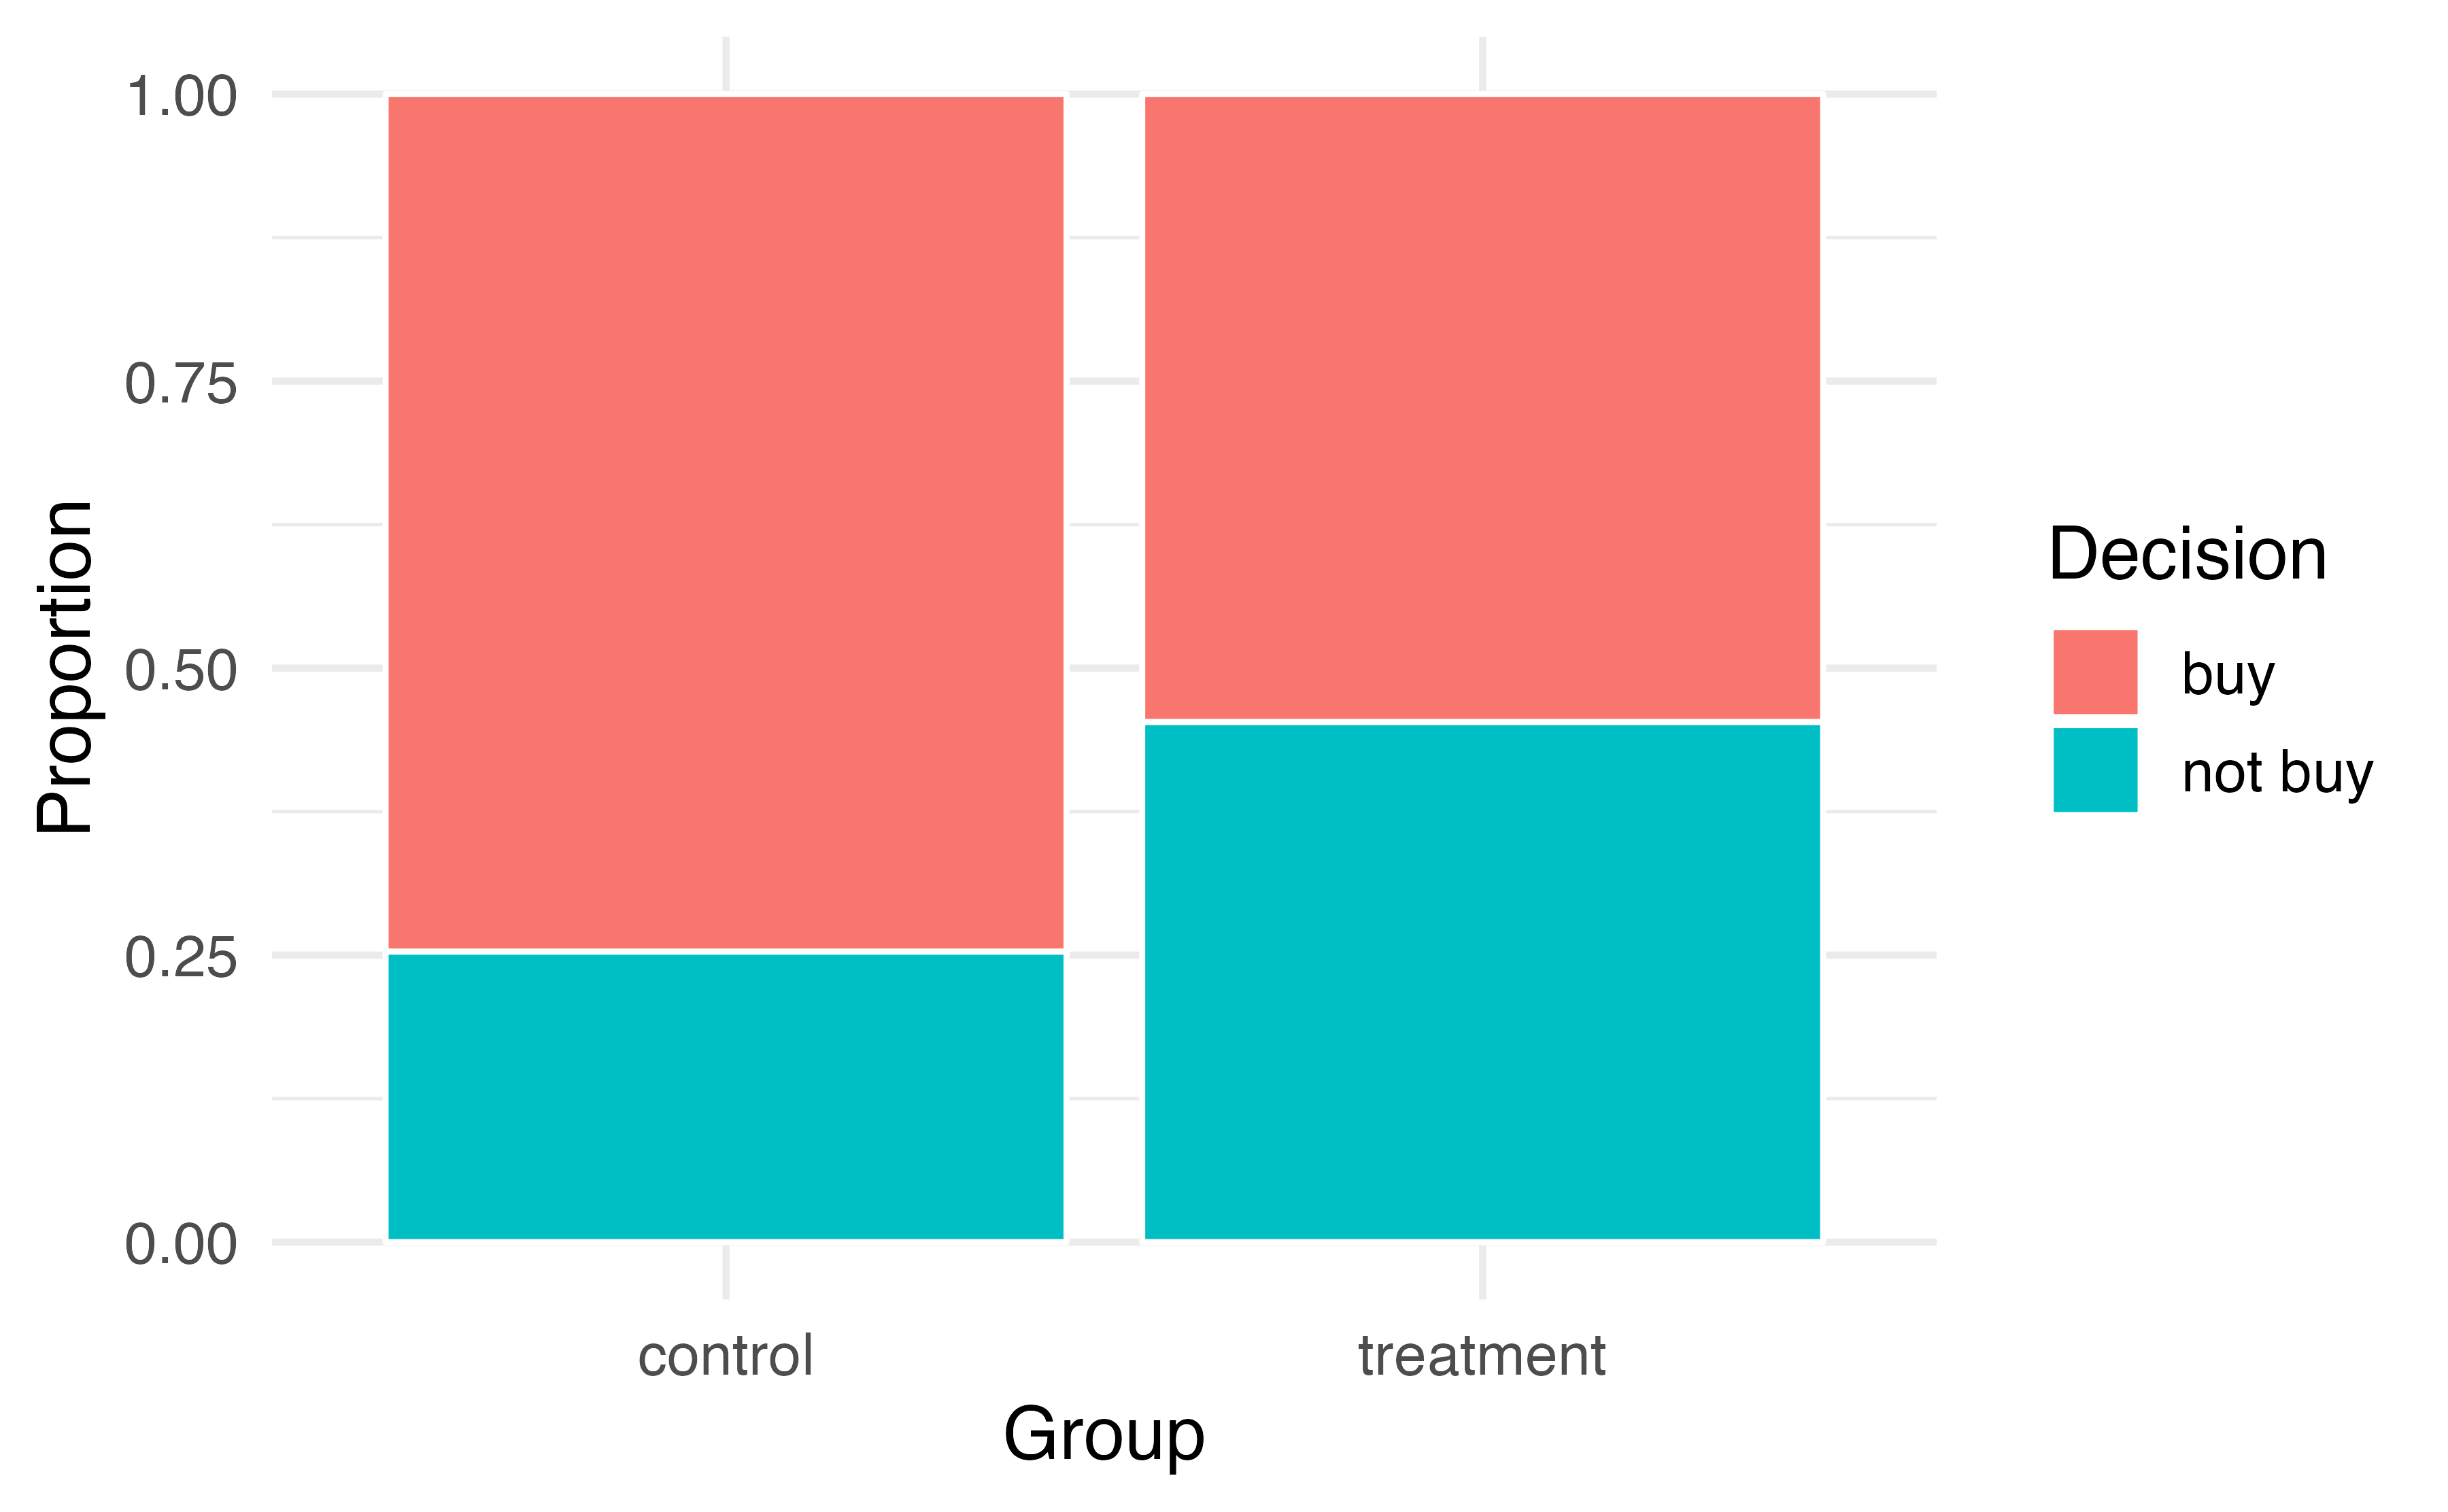 Segmented bar plot comparing the proportion who bought and did not buy the DVD between the control and treatment groups.